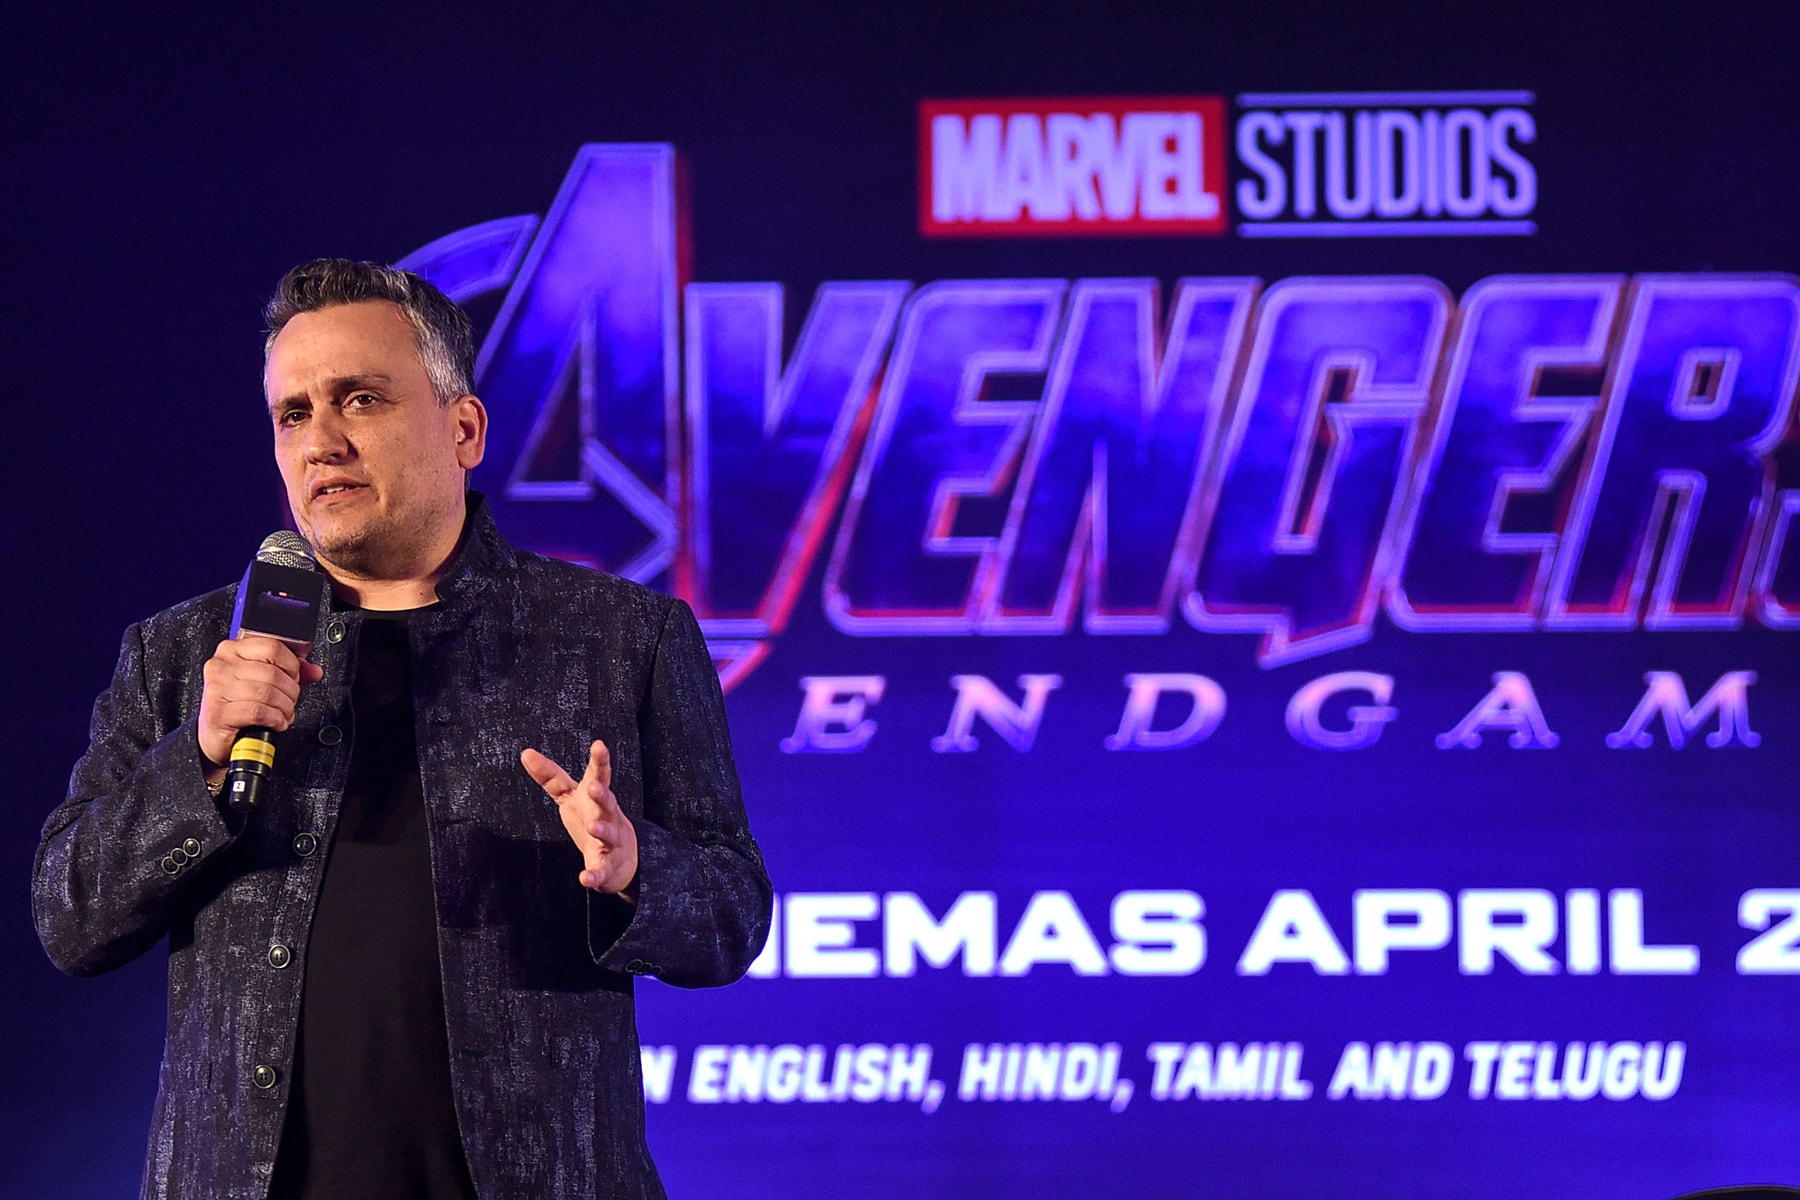 Russo Brothers Confirm 'Endgame' Is Their Last Marvel Film & Discuss First Openly Gay Character movies films marvel studios marvel cinematic universe